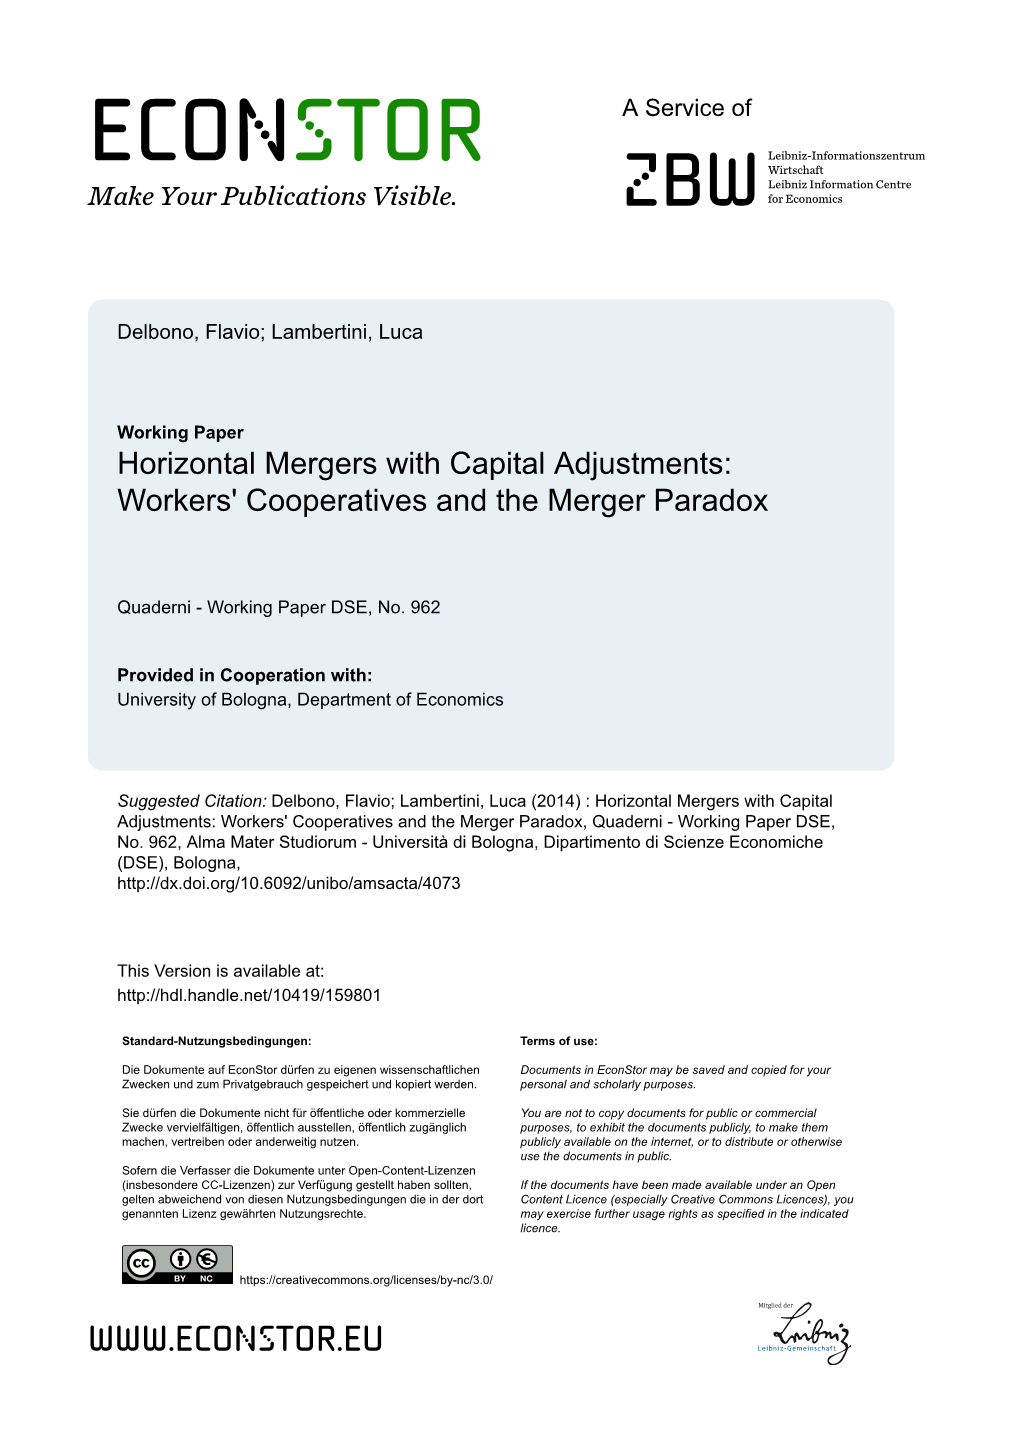 Horizontal Mergers with Capital Adjustments: Workers' Cooperatives and the Merger Paradox